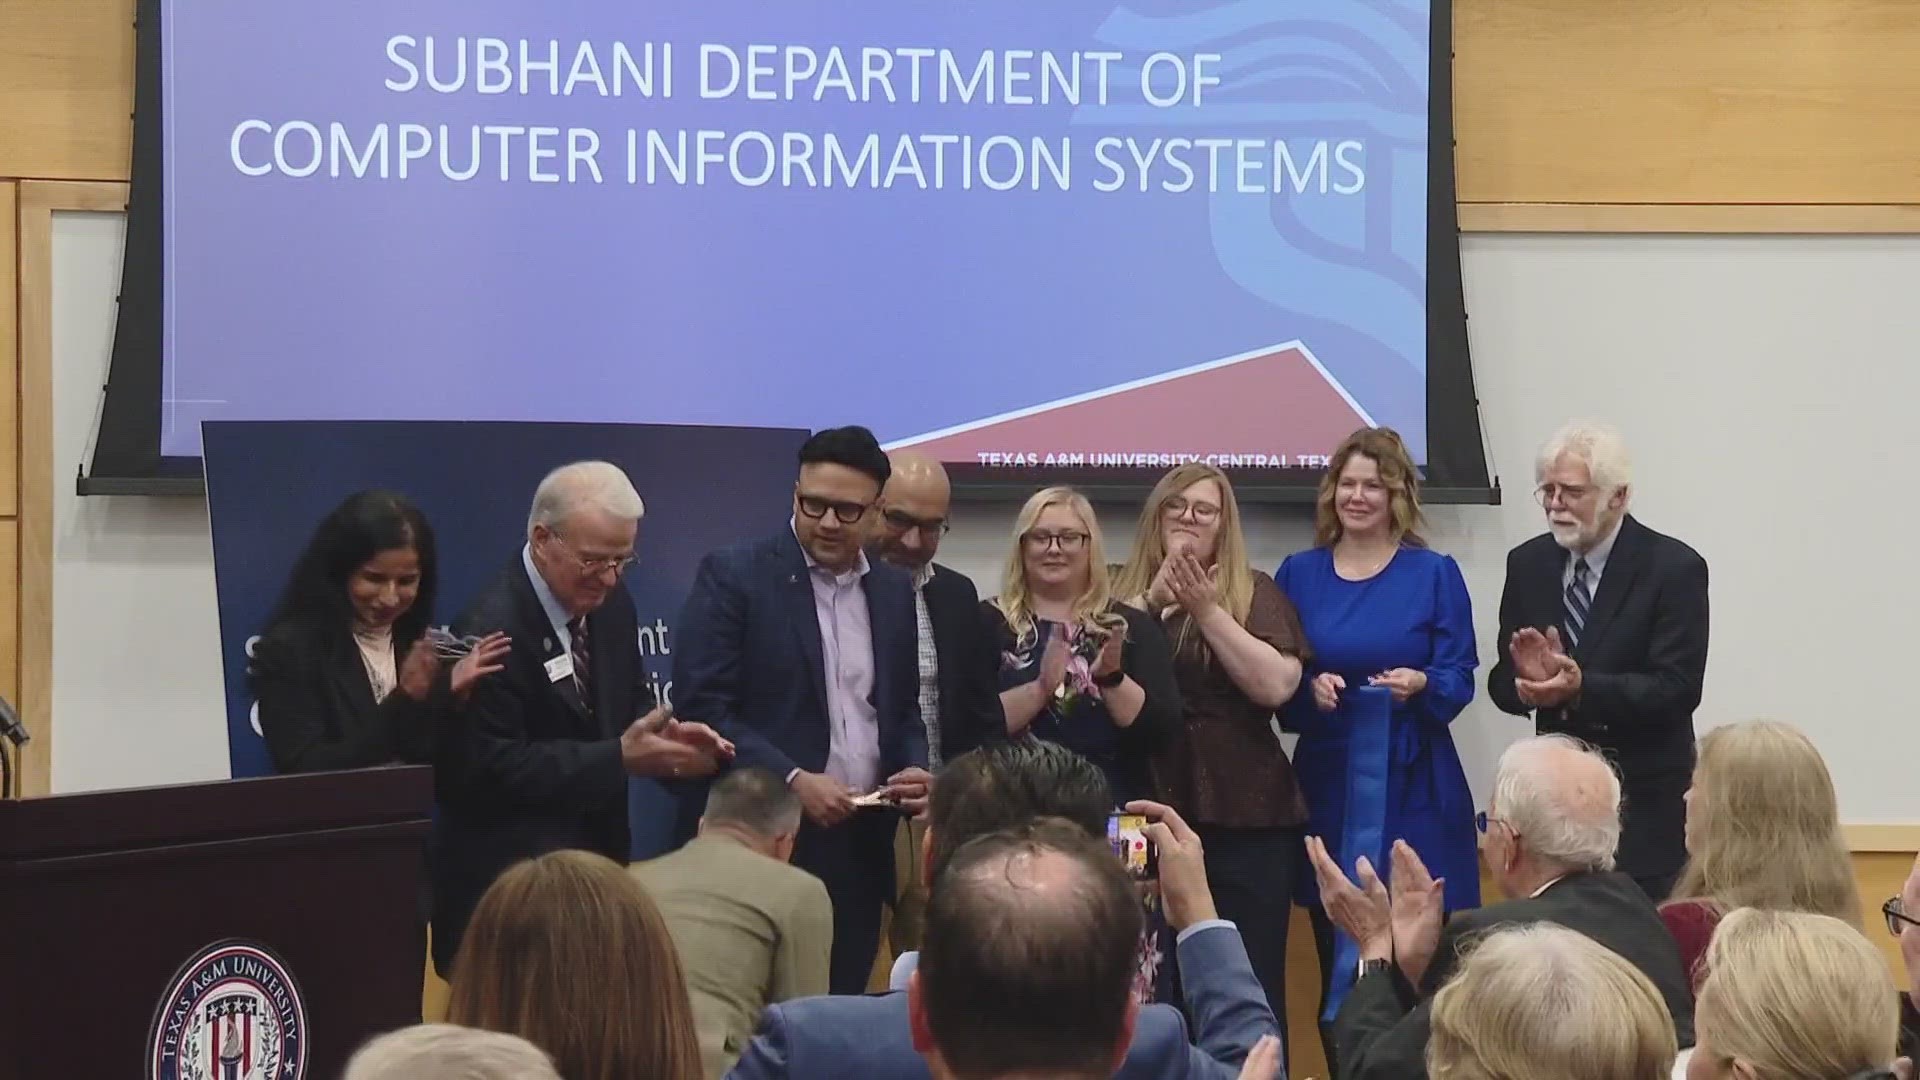 Texas A&M names its computer information systems program in honor of adjunct faculty member Abdul Subhani.